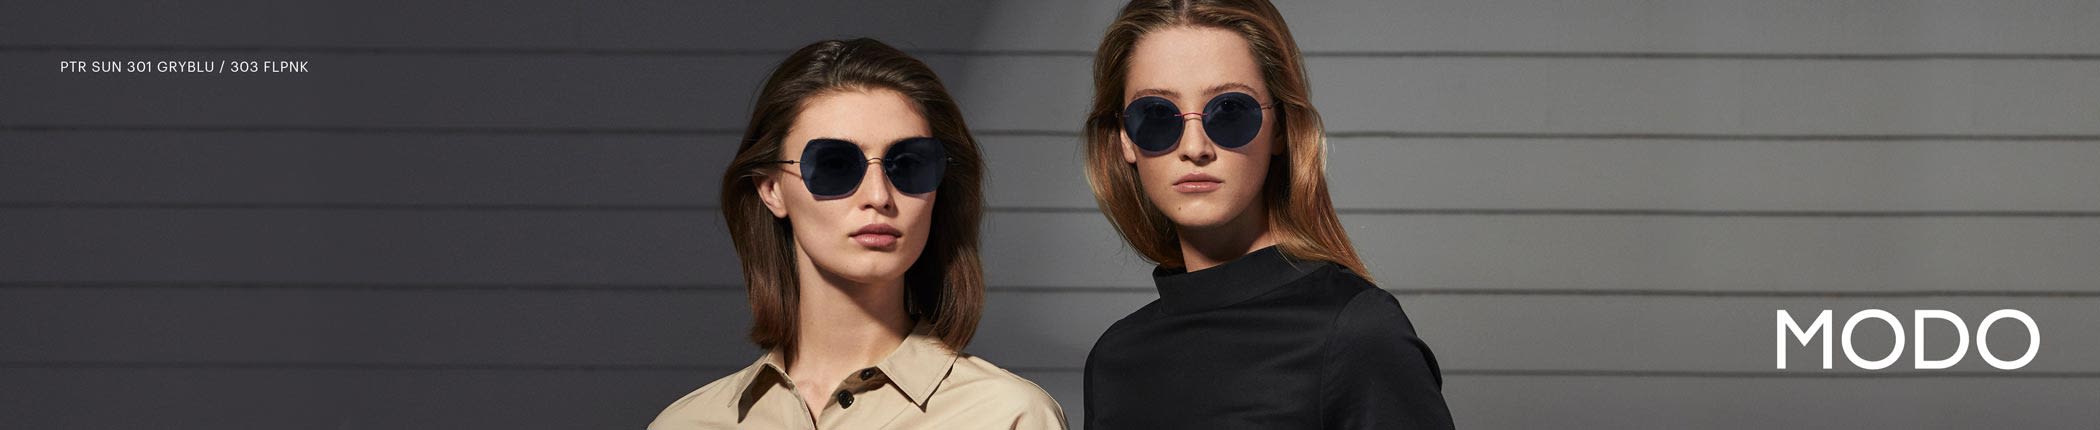 Shop Modo Sunglasses - featuring 301 and 303